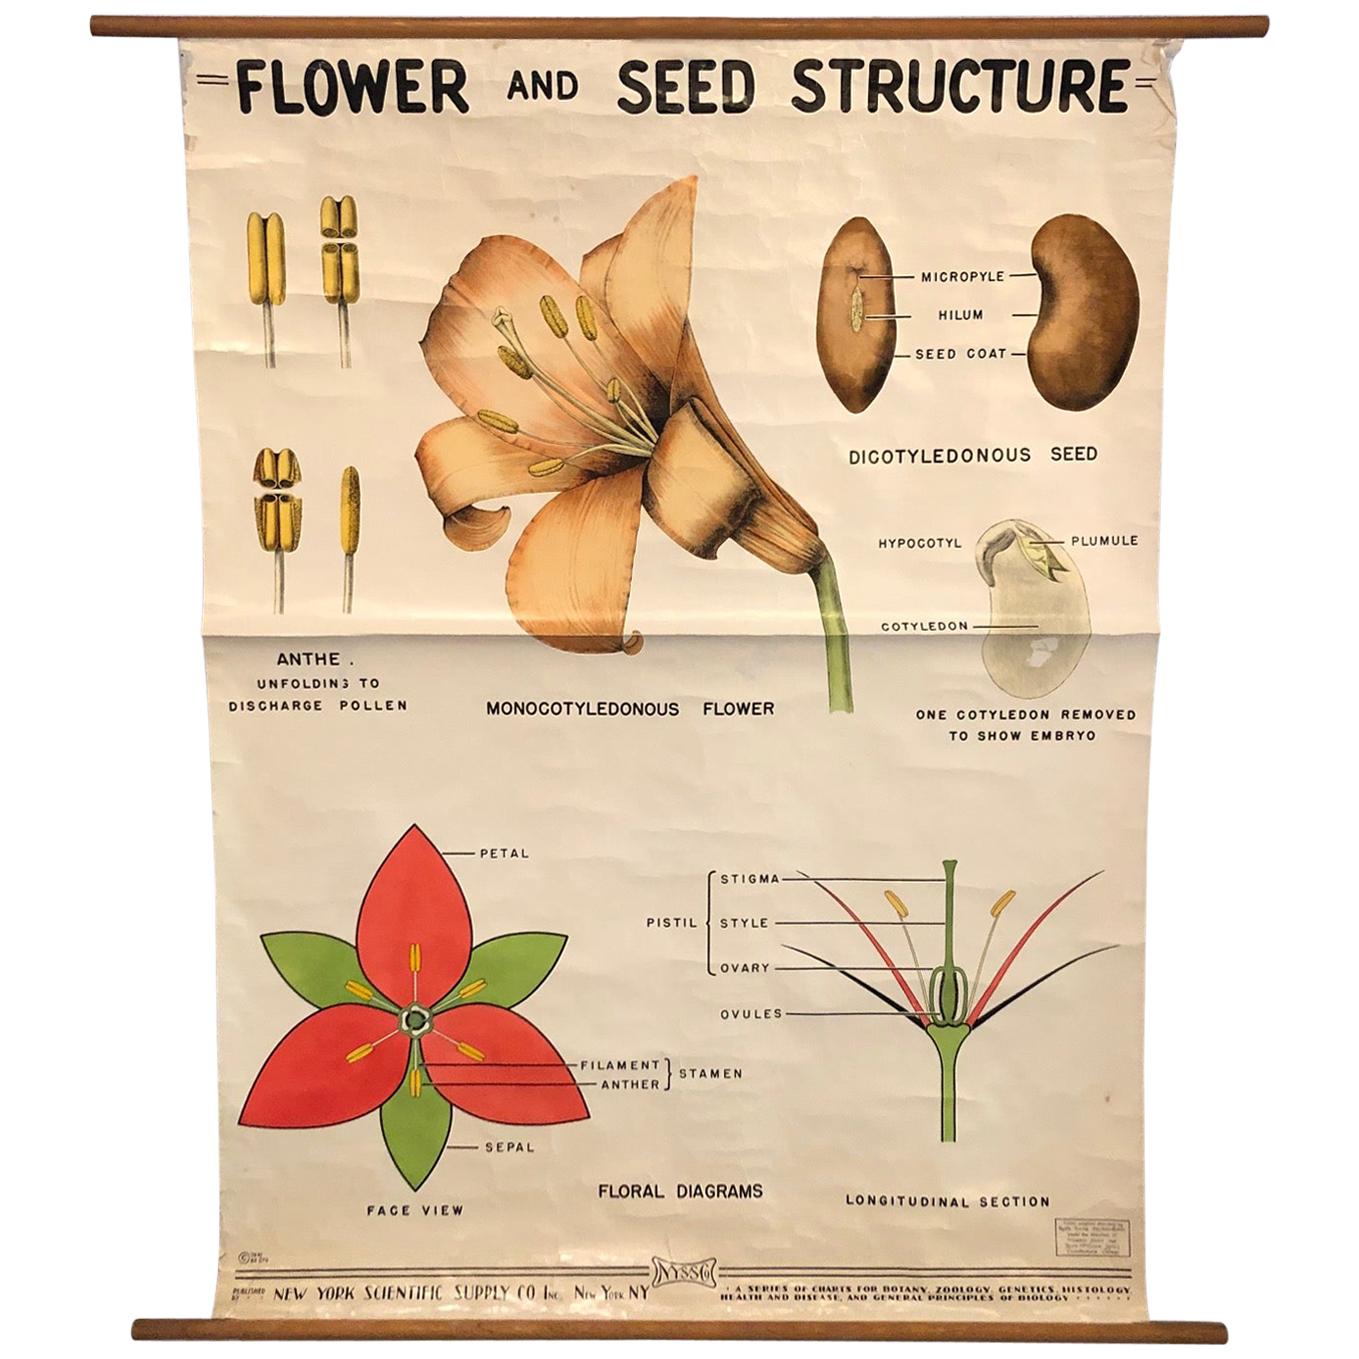 Educational Flower And Seed Botanical Chart by New York Scientific Supply Co. For Sale